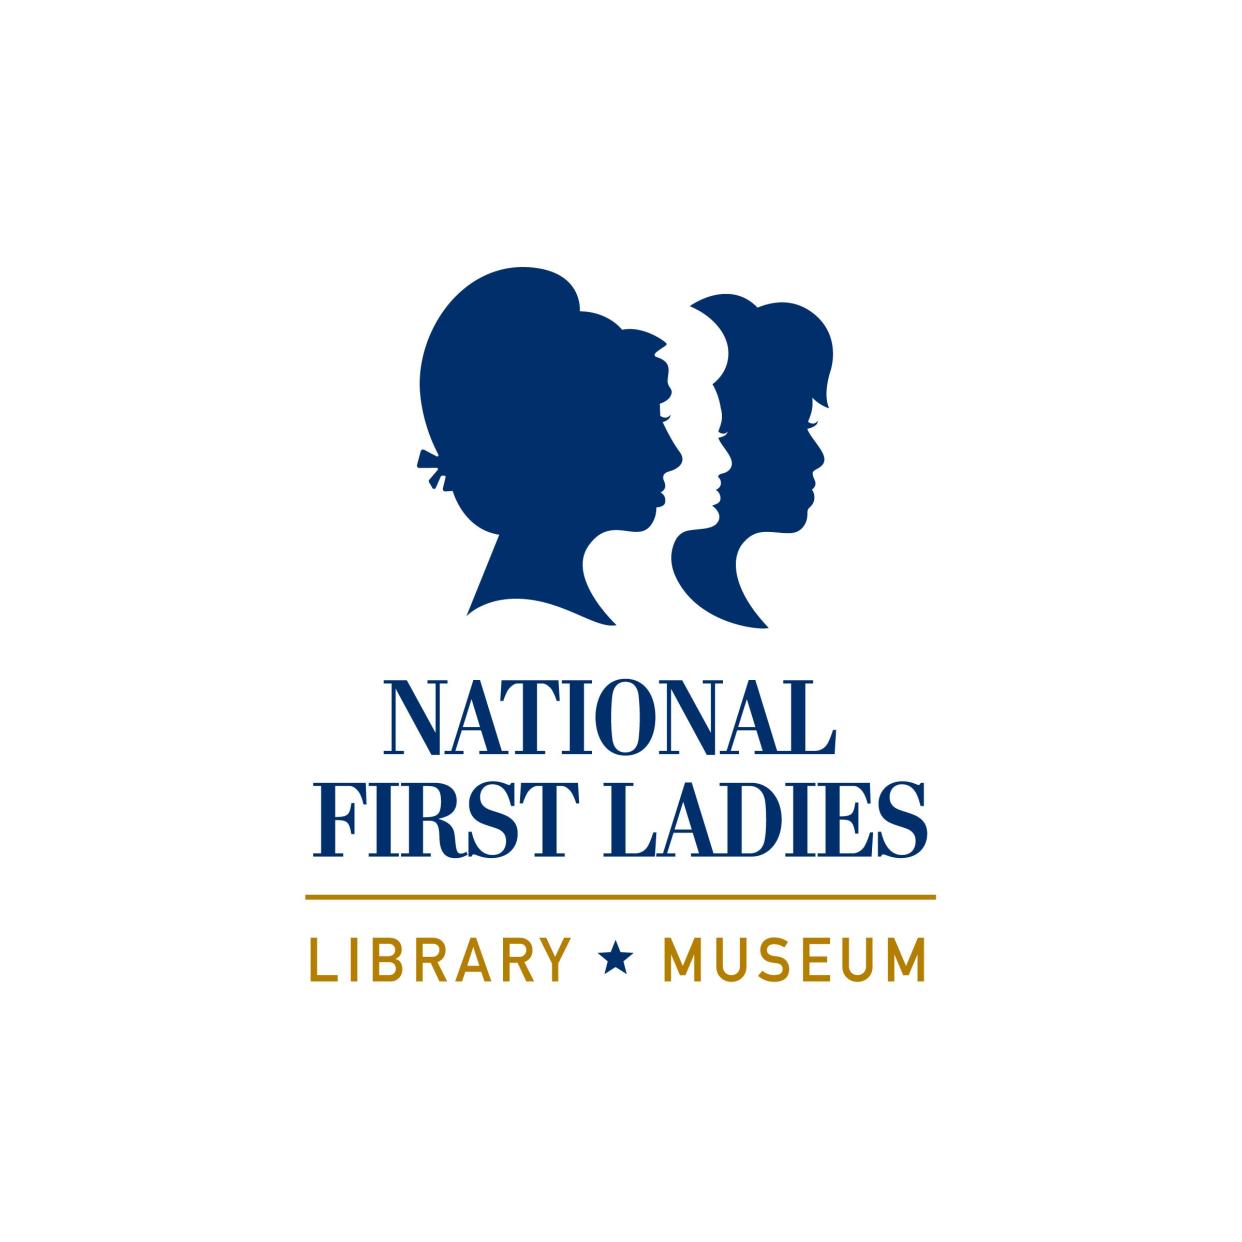 The National First Ladies Library & Museum has a new logo.